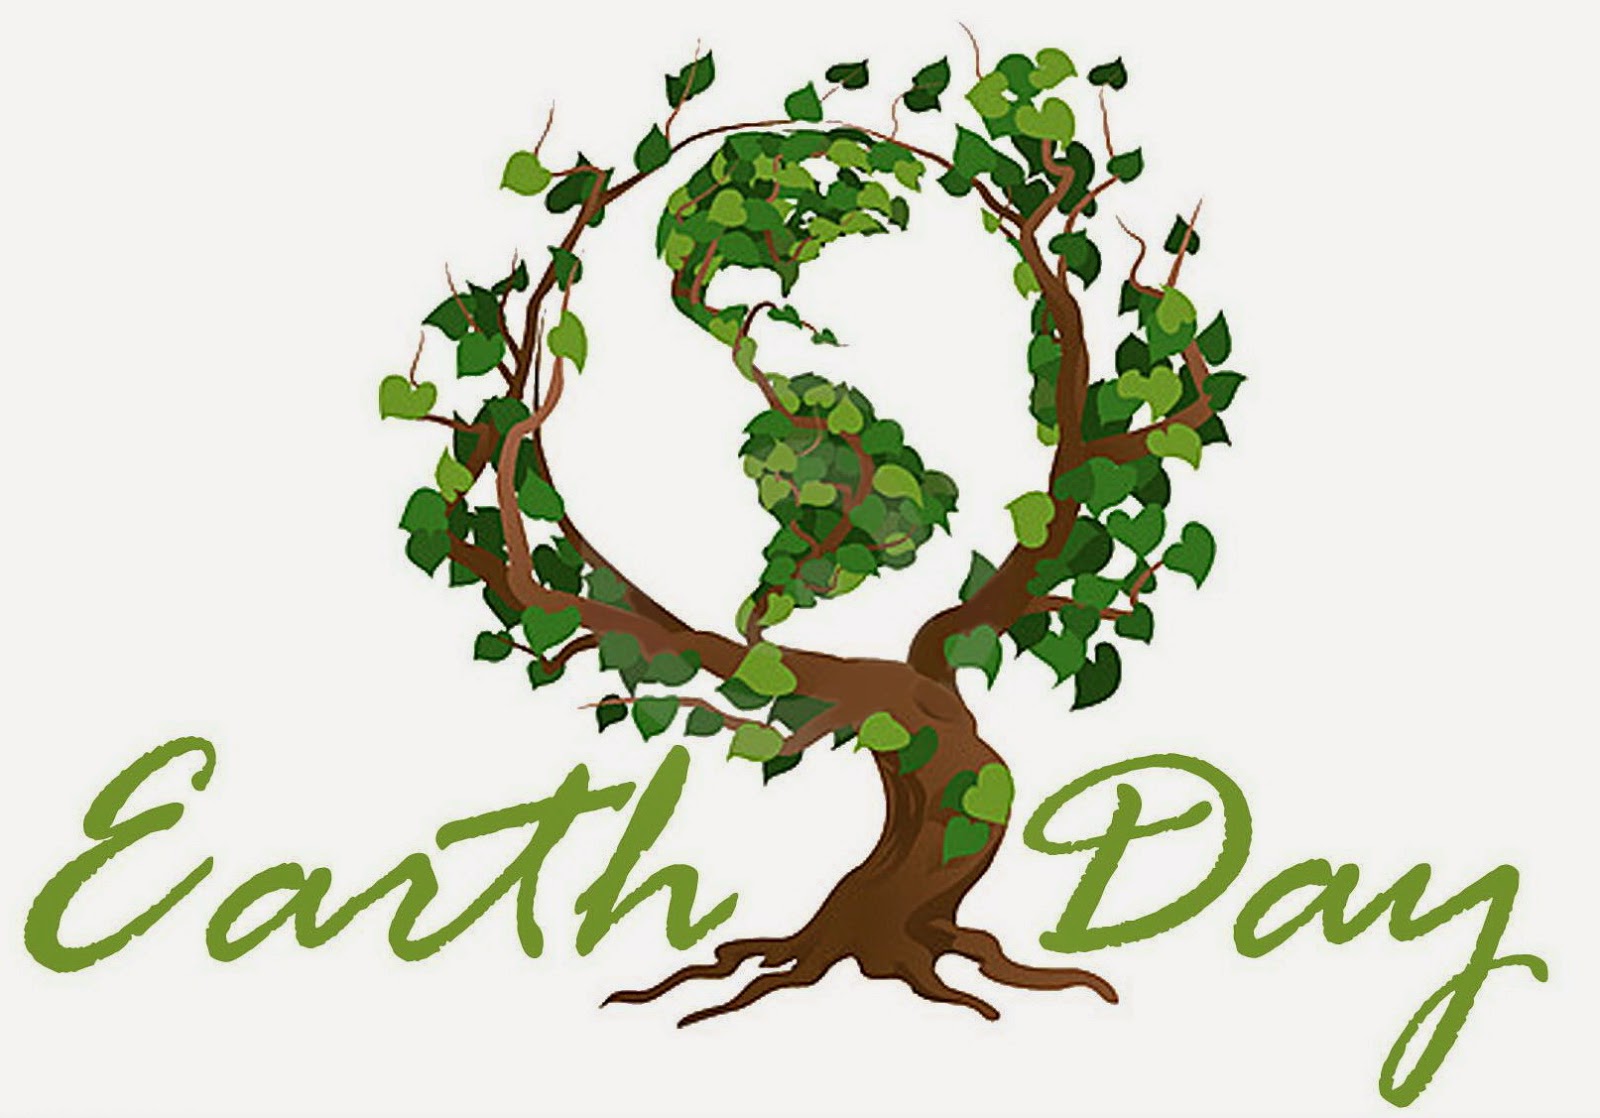 Logo with the text &quot;Earth Day&quot; below a drawing of a tree whose branches and leaves form a globe with North and South America in the center.